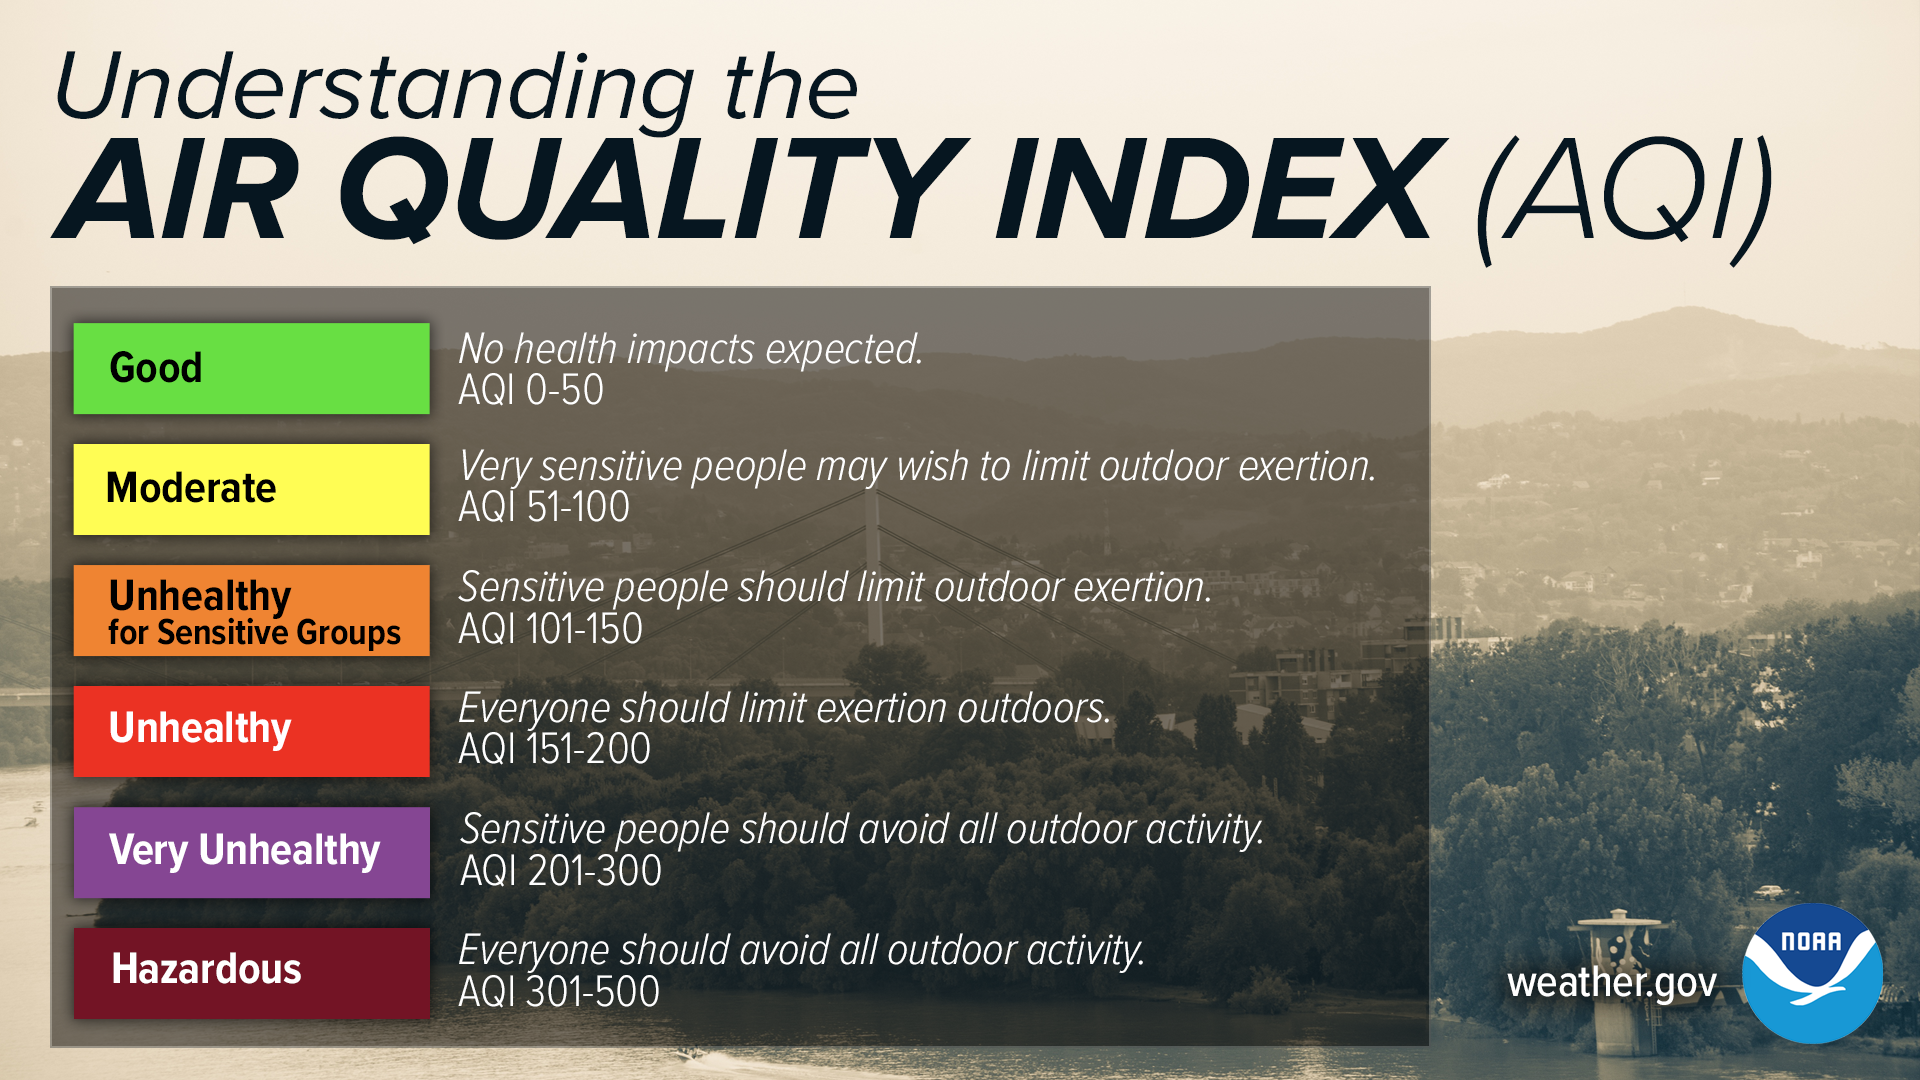 Understanding the Air Quality Index (AQI). Good is AQI 0-50, no health impacts expected. Moderate is AQI 51-100, very sensitive people may wish to limit outdoor exertion. Unhealthy for Sensitive Groups is AQI 101-150, sensitive people should limit outdoor exertion. Unhealthy is AQI 151-200, everyone should limit exertion outdoors. Very Unhealthy is AQI 201-300, sensitive people should avoid all outdoor activity. Hazardous is AQI 301-500, everyone should avoid all outdoor activity.